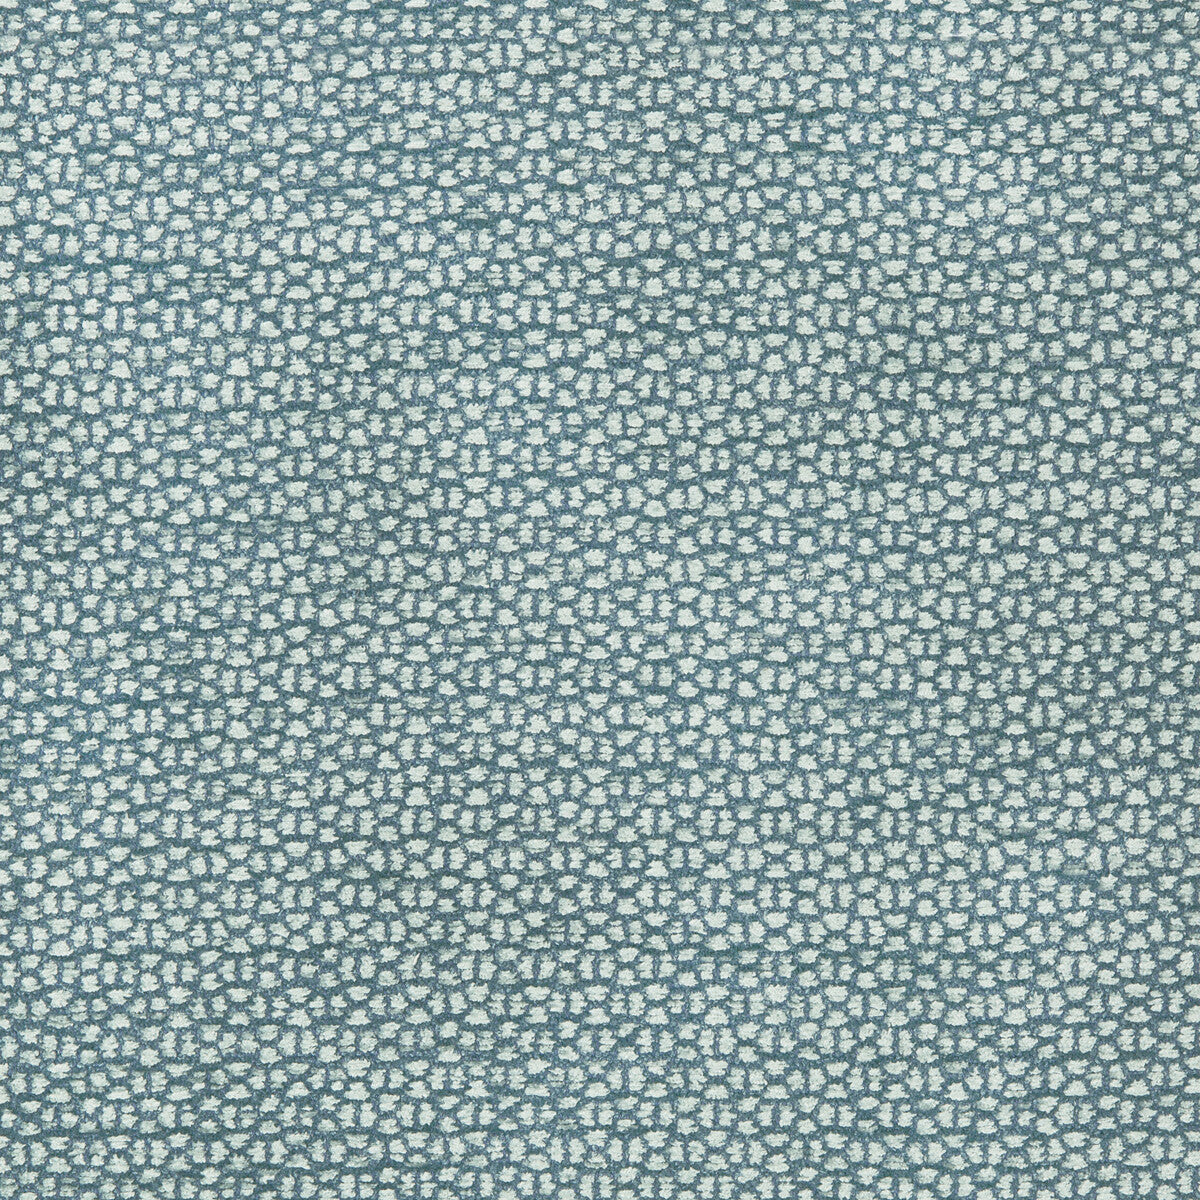 Marolay Texture fabric in aqua color - pattern 8019144.13.0 - by Brunschwig &amp; Fils in the Chambery Textures II collection